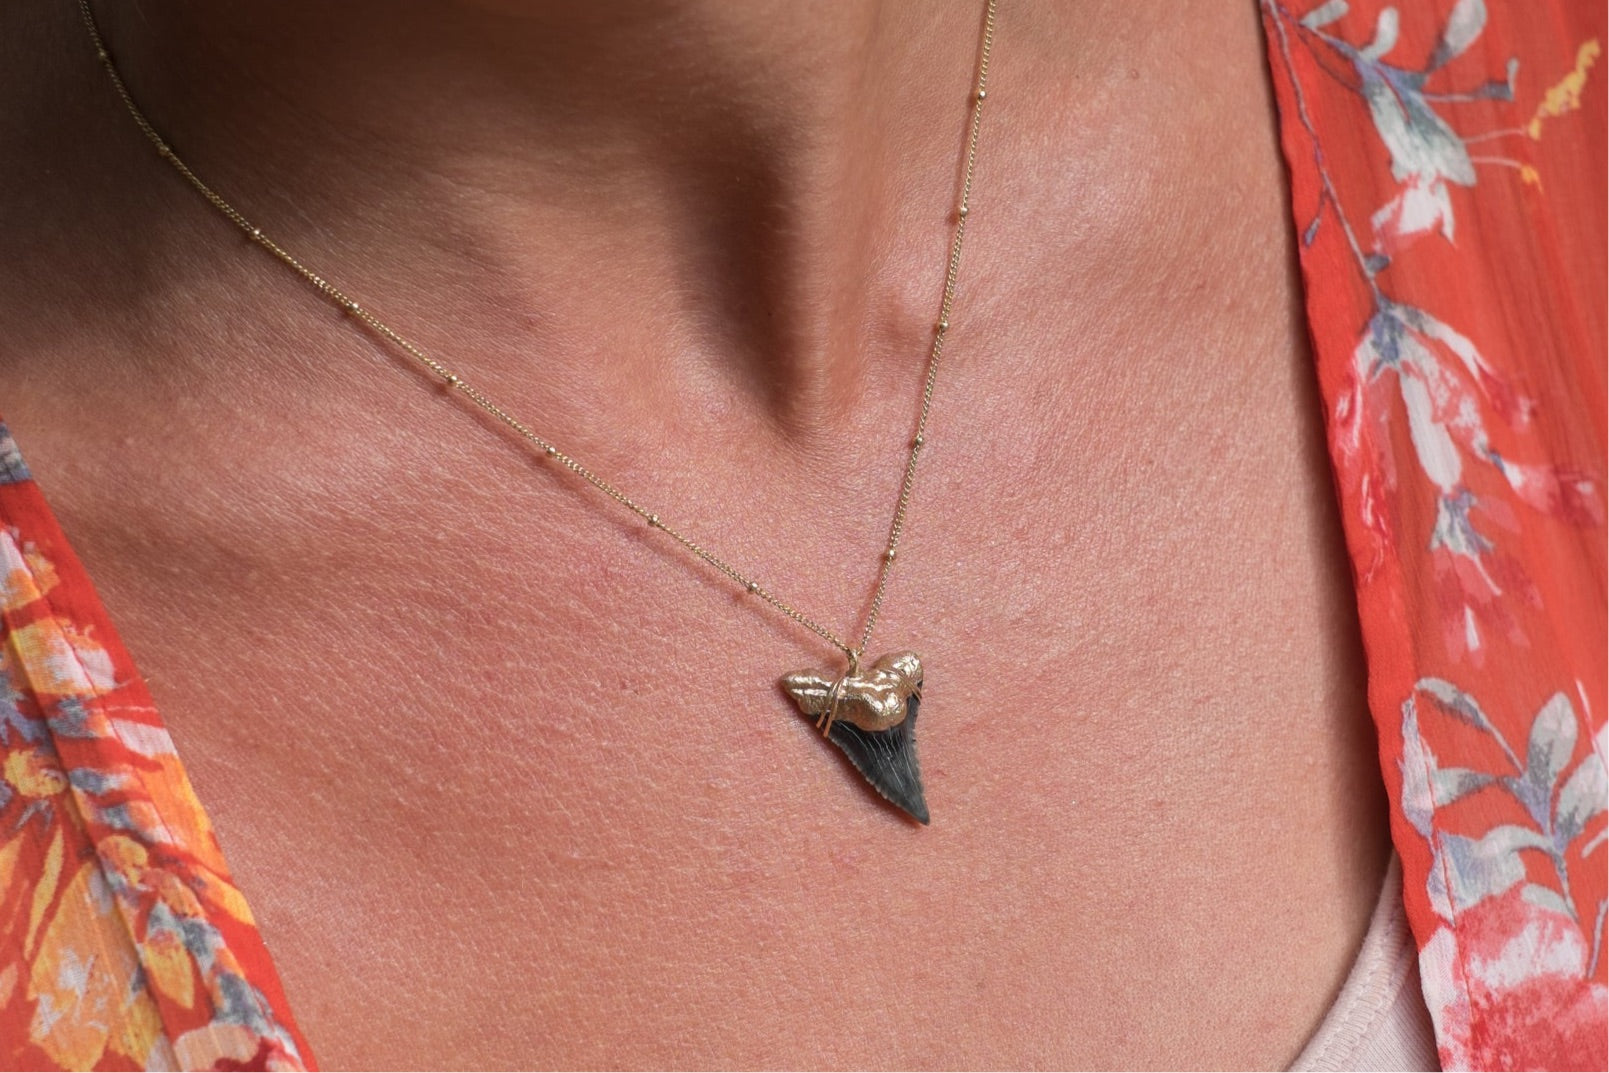 Real Shark Tooth Necklaces and Souvenirs - Oceanicshark